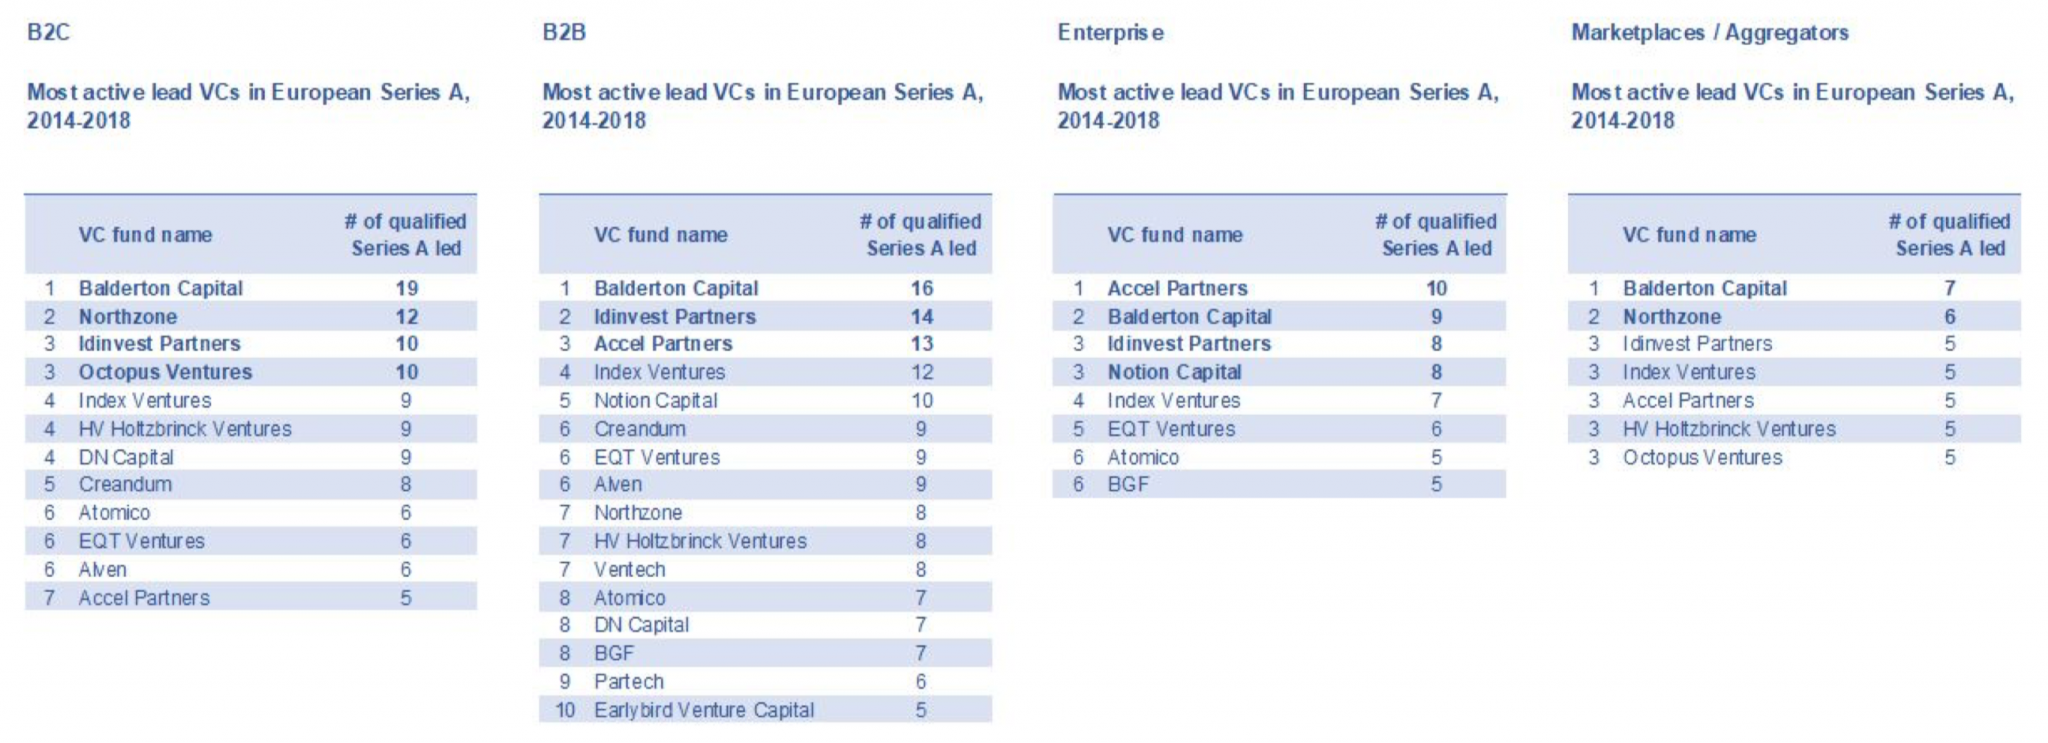 Profiles of VCs by sector